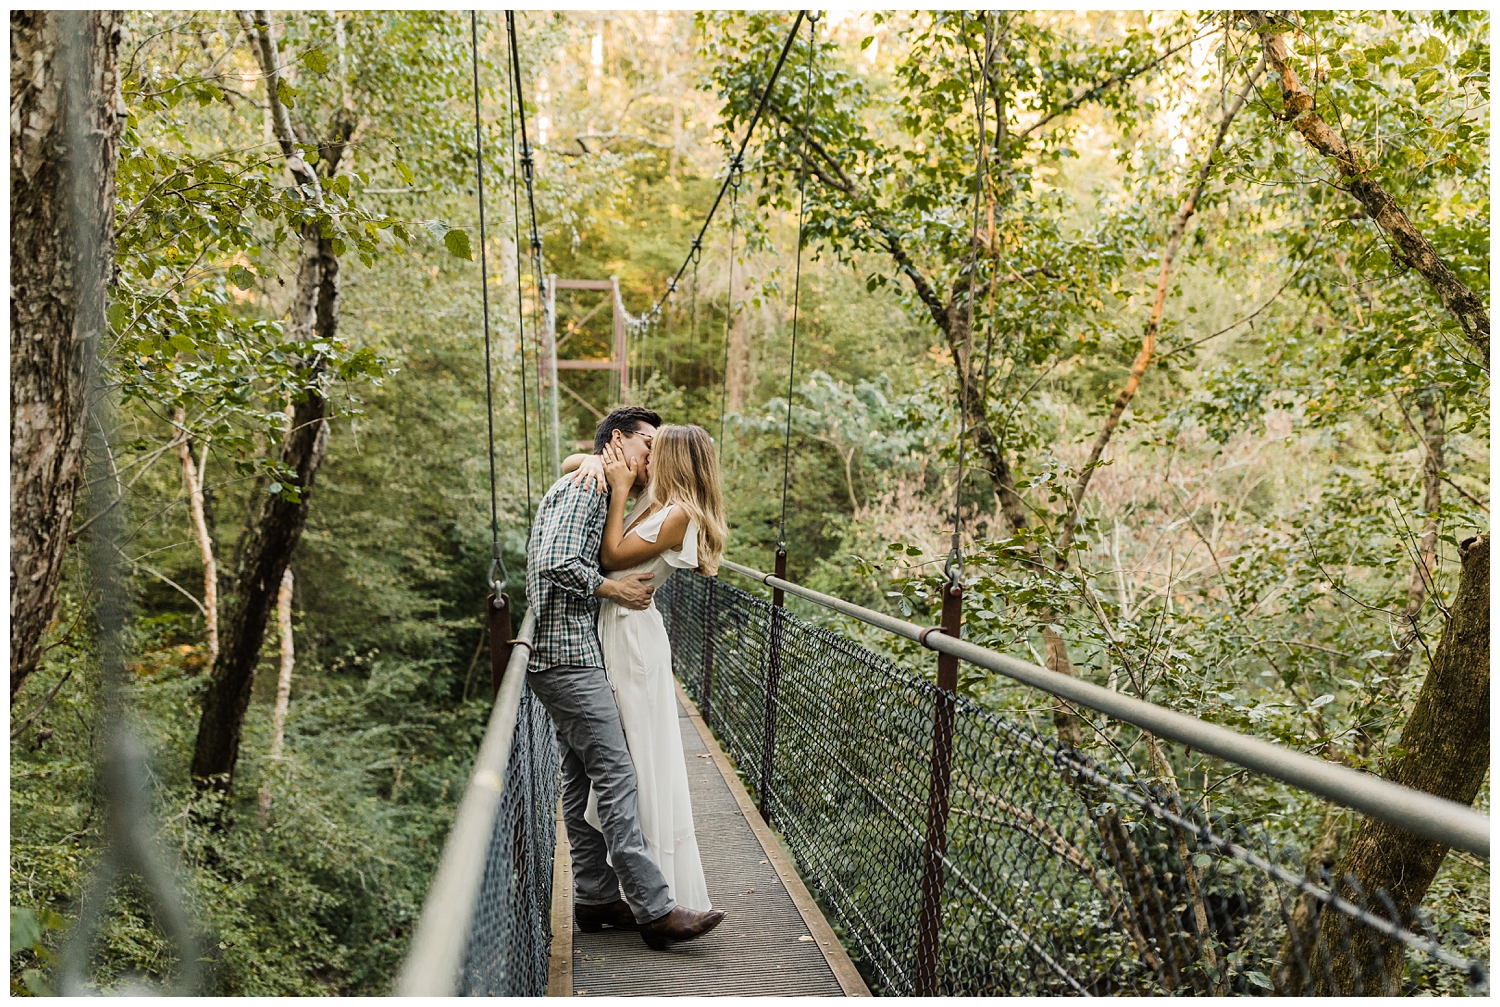 Cute, young couple on a suspension bridge during an engagement session in Lullwater Park in Atlanta, Georgia